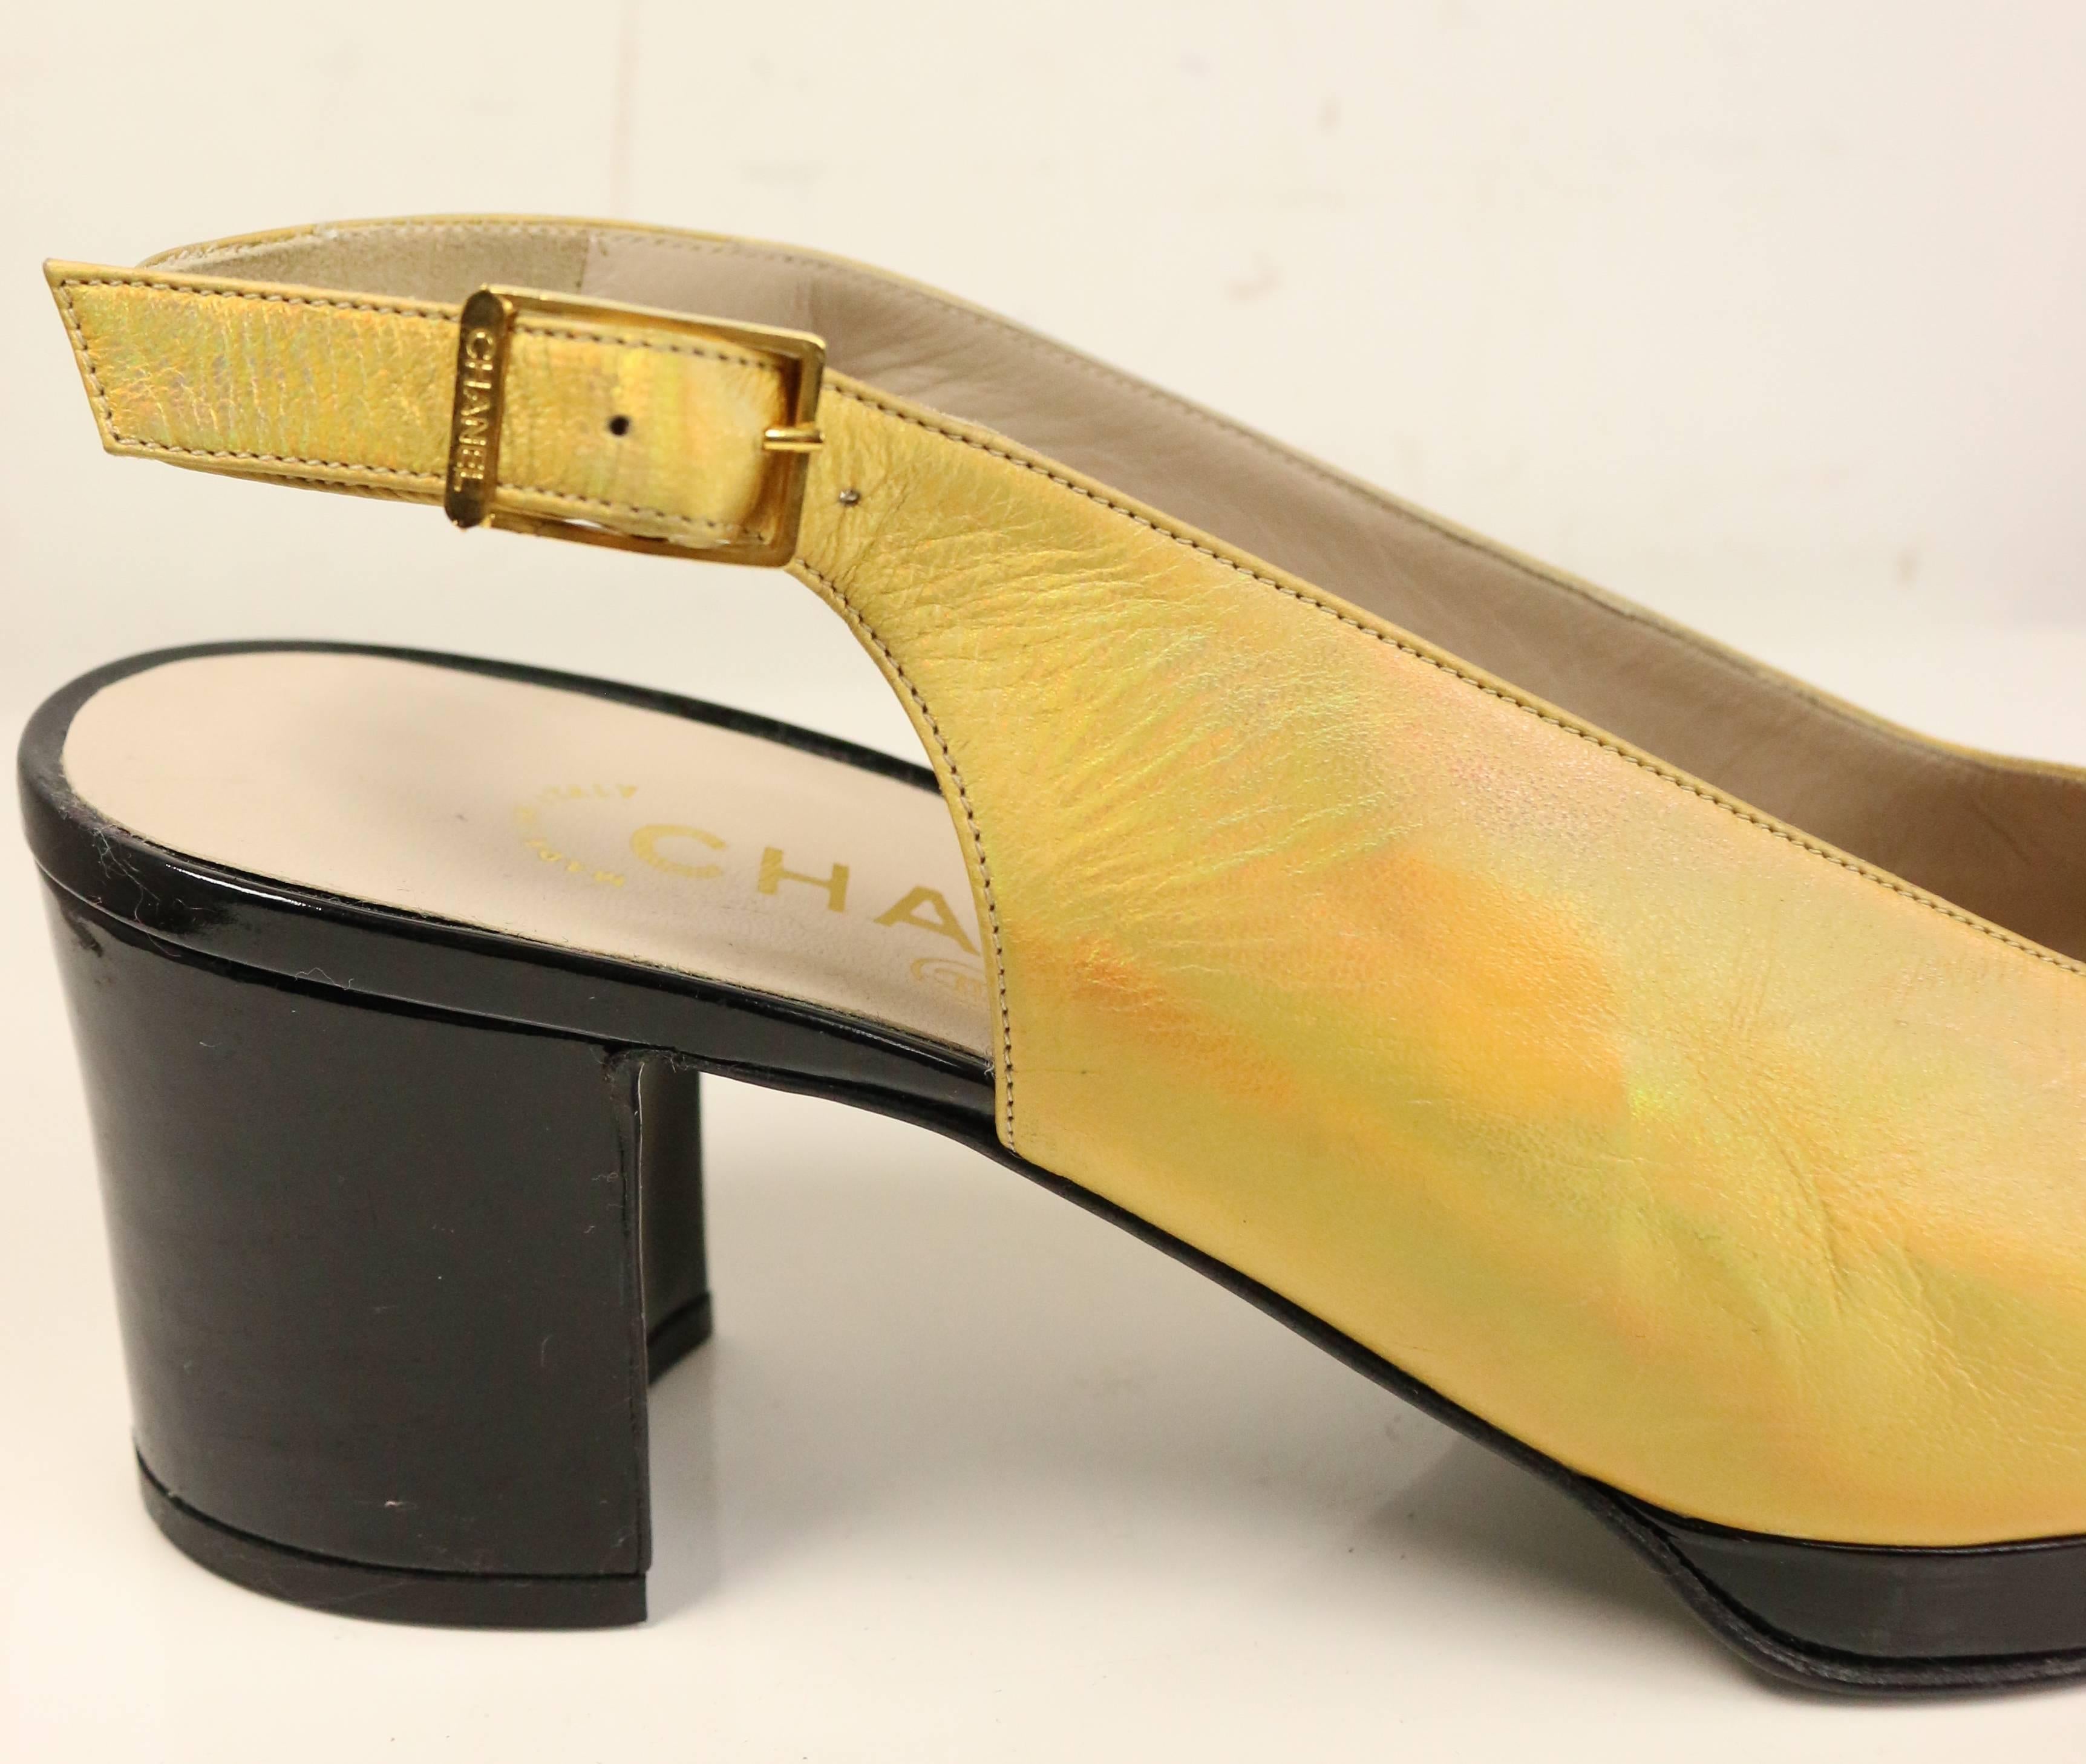 - Vintage 90s Chanel bi tone metallic gold with black patent leather square toe Mary Jane slingback shoes. This is a classic Coco Chanel style, elegant and chic summer shoes. 

- Size 37.5. 

- Made in Italy.

- Comes with dust bag. 

- Condition: